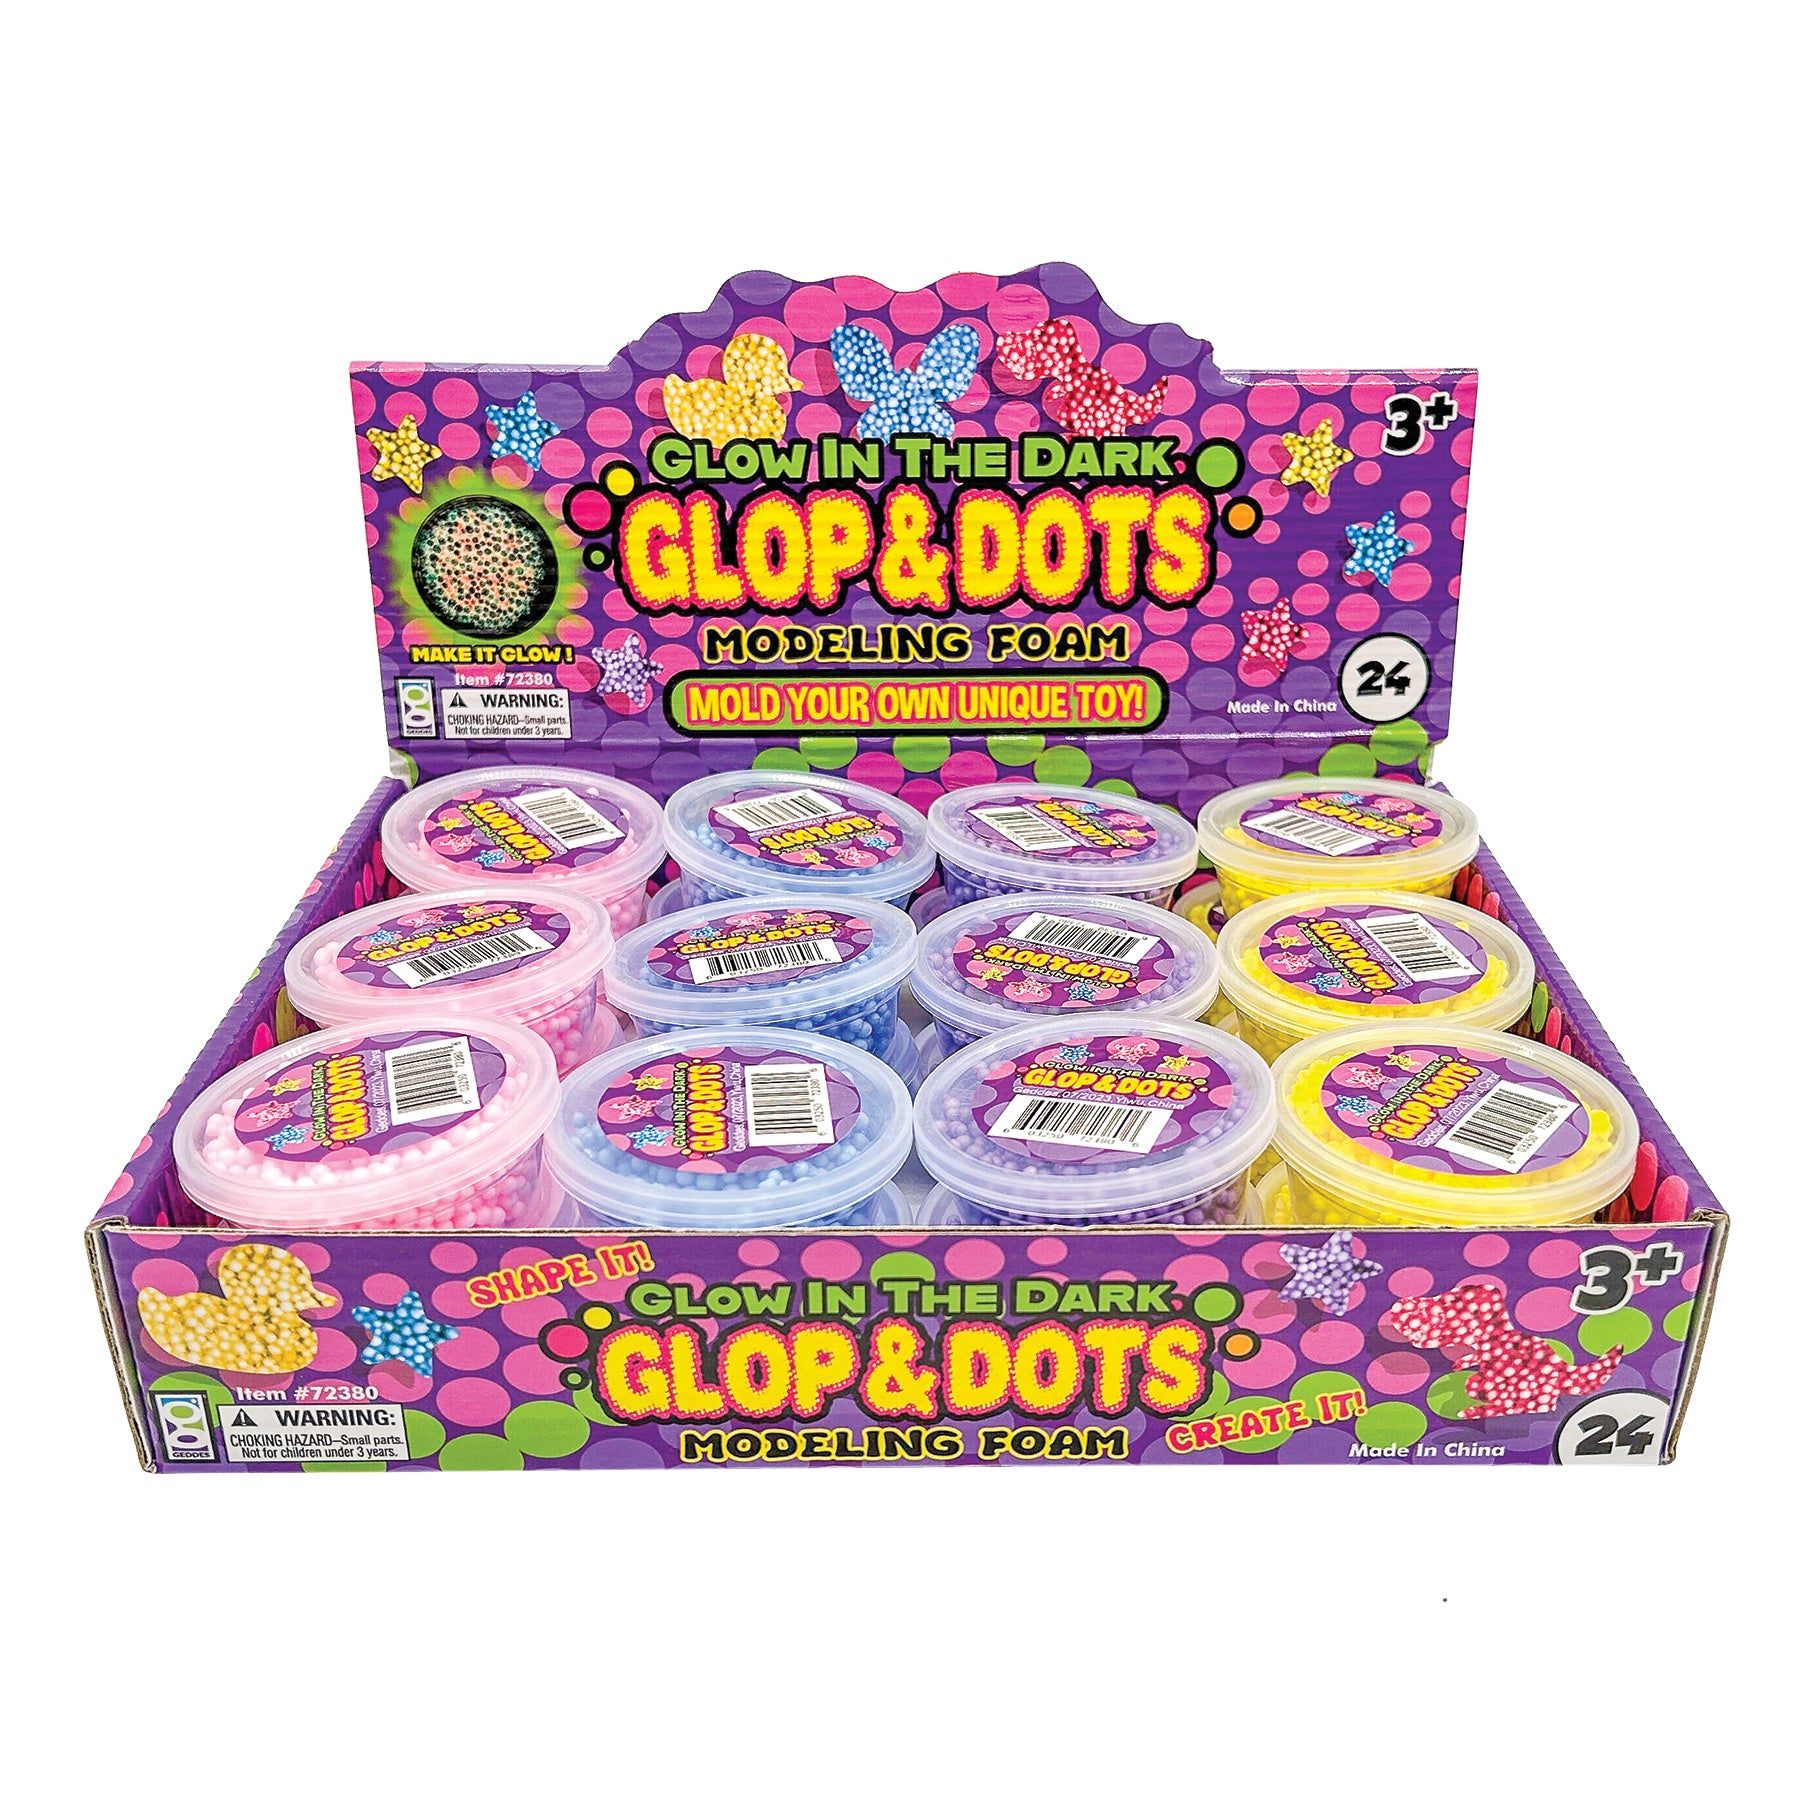 Glop And Dots Modeling Foam (Pack Of 24) 